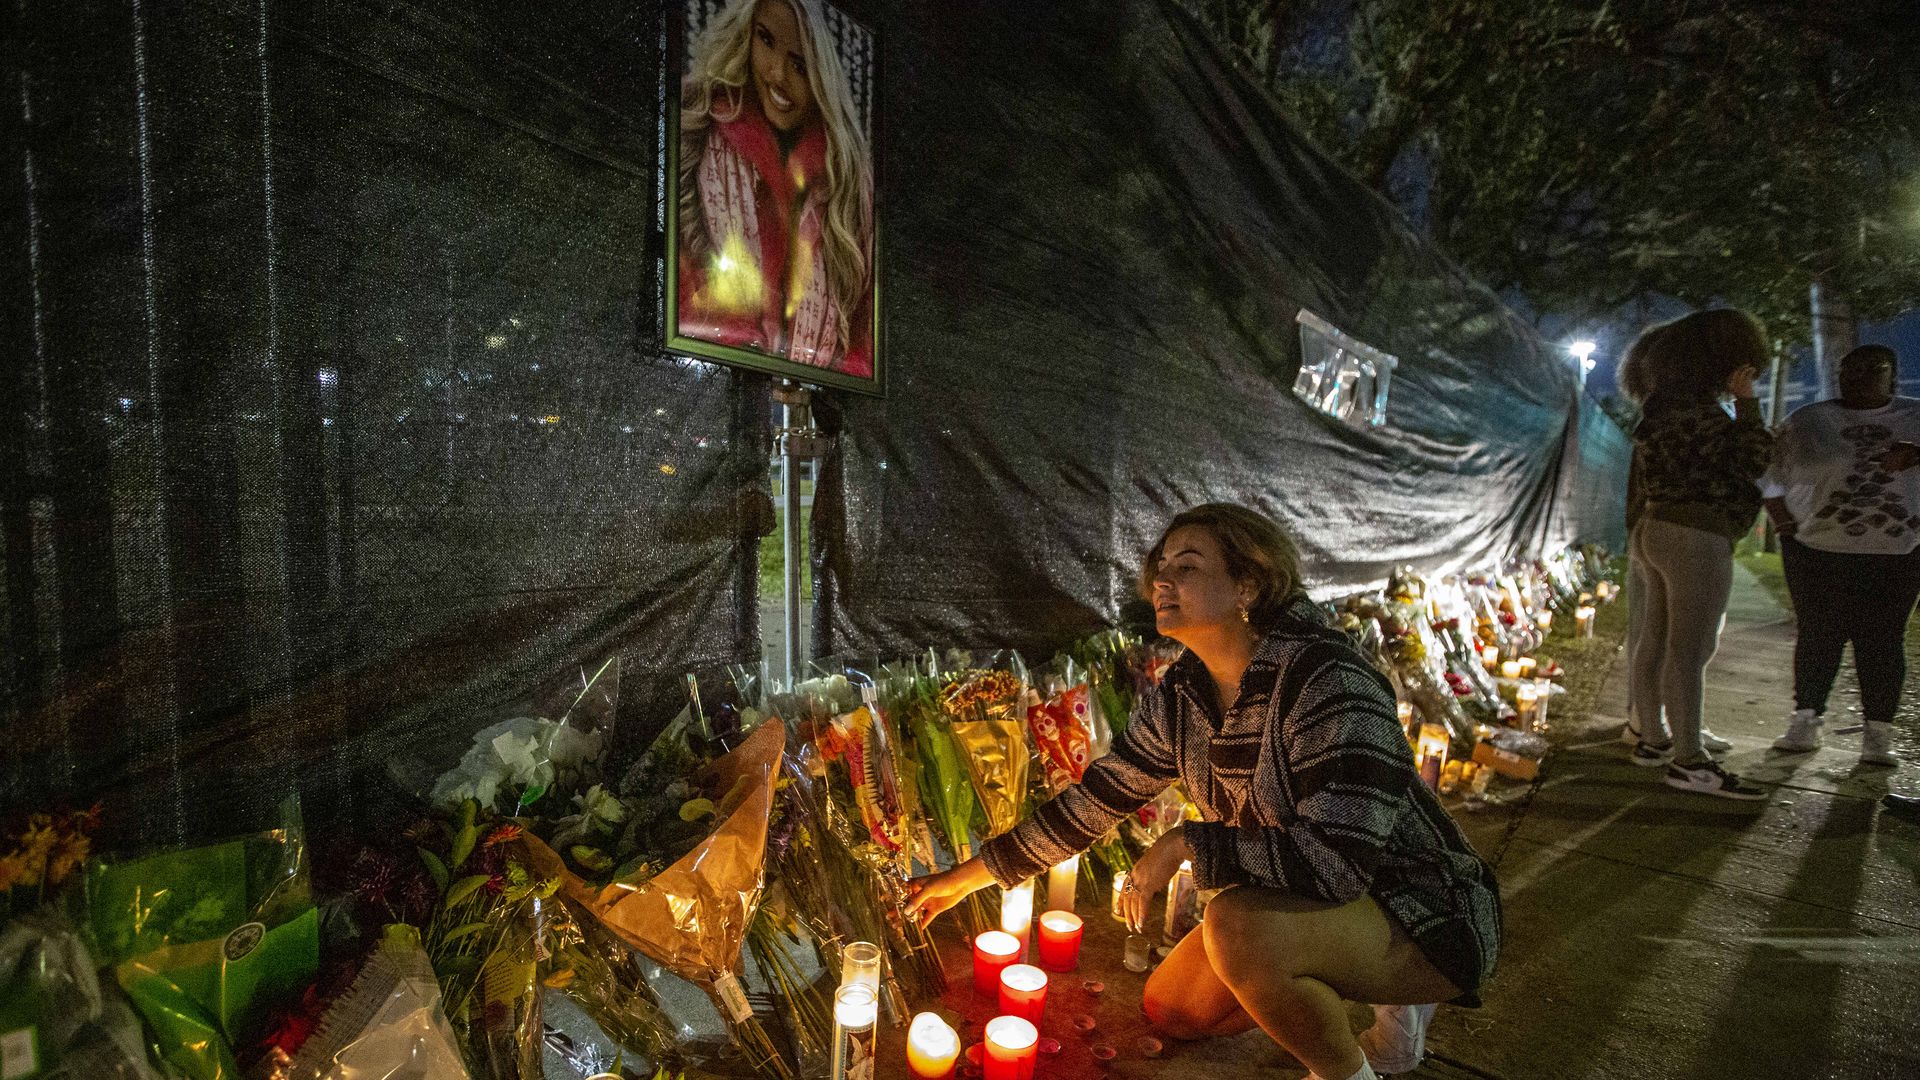  A makeshift memorial on November 7, 2021 at the NRG Park grounds where 10 people died following a crowd surge at the Astroworld Festival in Houston, Texas.